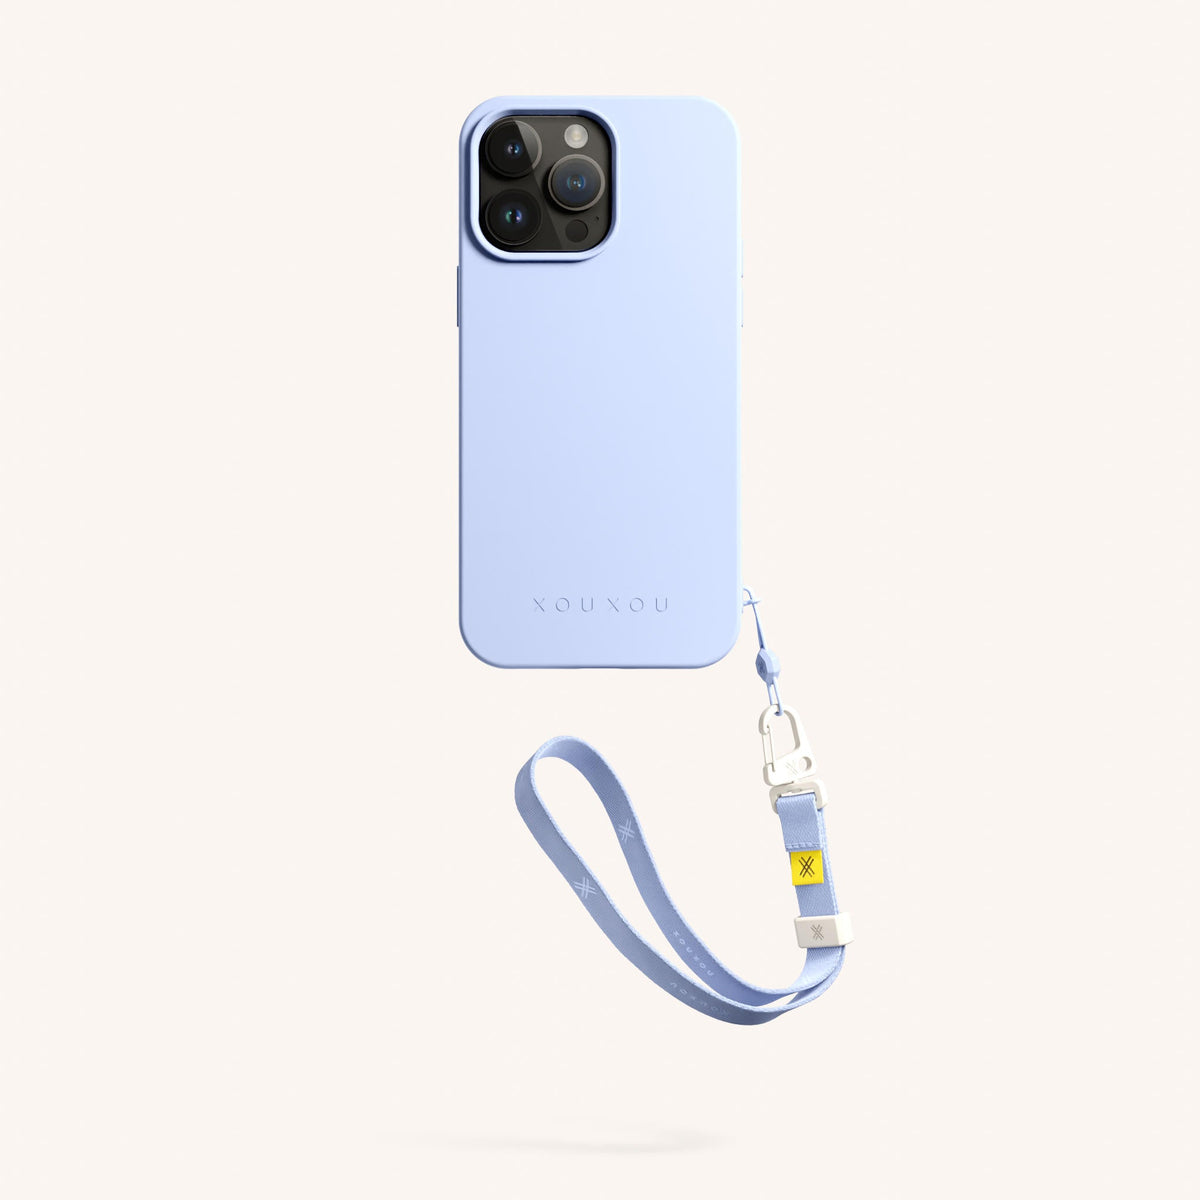 iPhone Case with Wrist Straps - Never drop your phone again